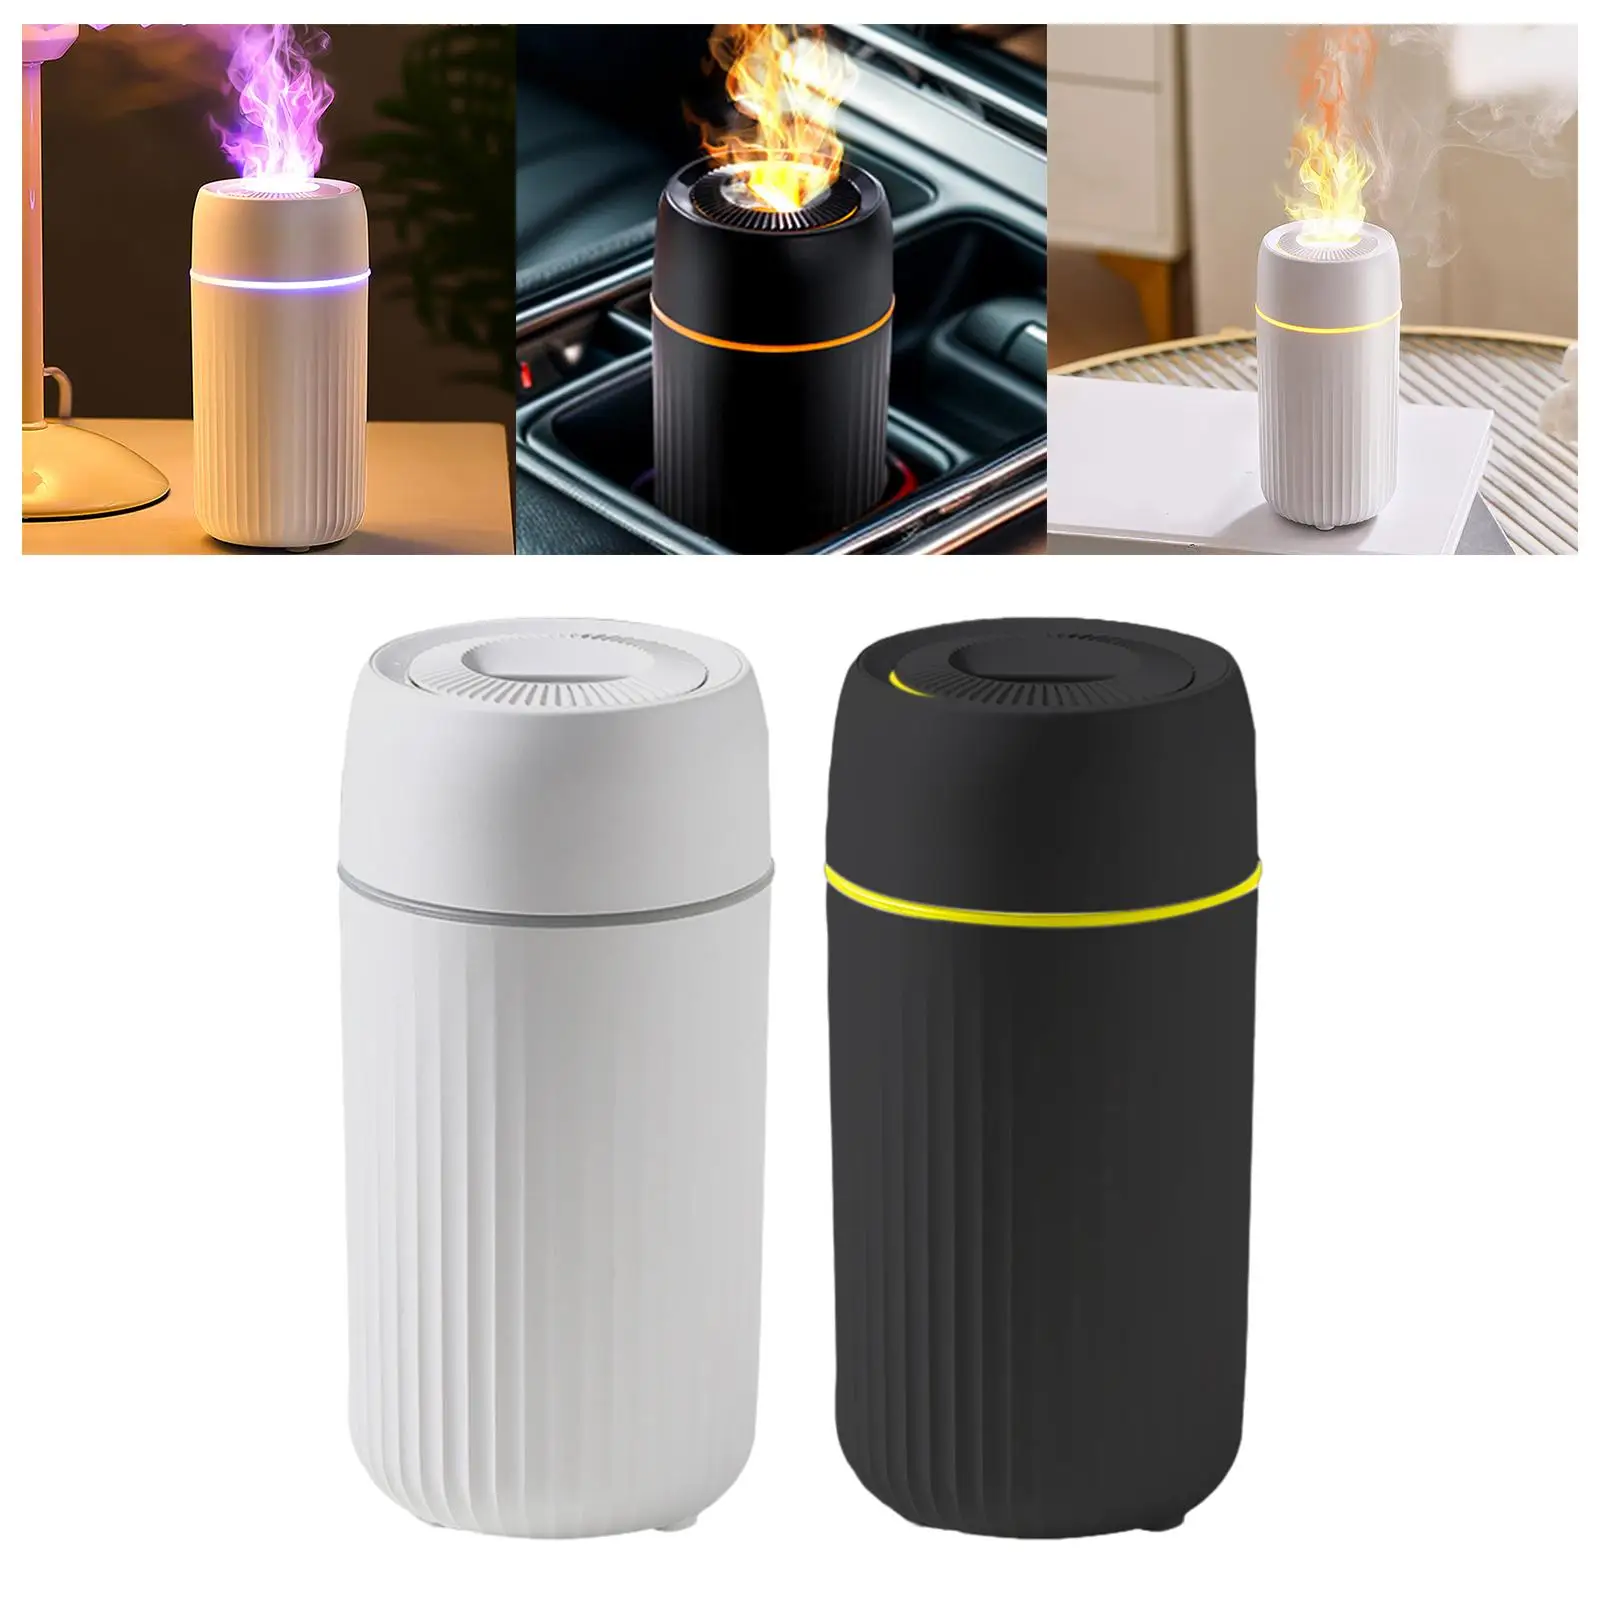 Essential Oil Diffuser Air Diffuser 7 Color Simulation Flame USB Aroma Diffuser Air Humidifier for Yoga Room SPA Car Living Room